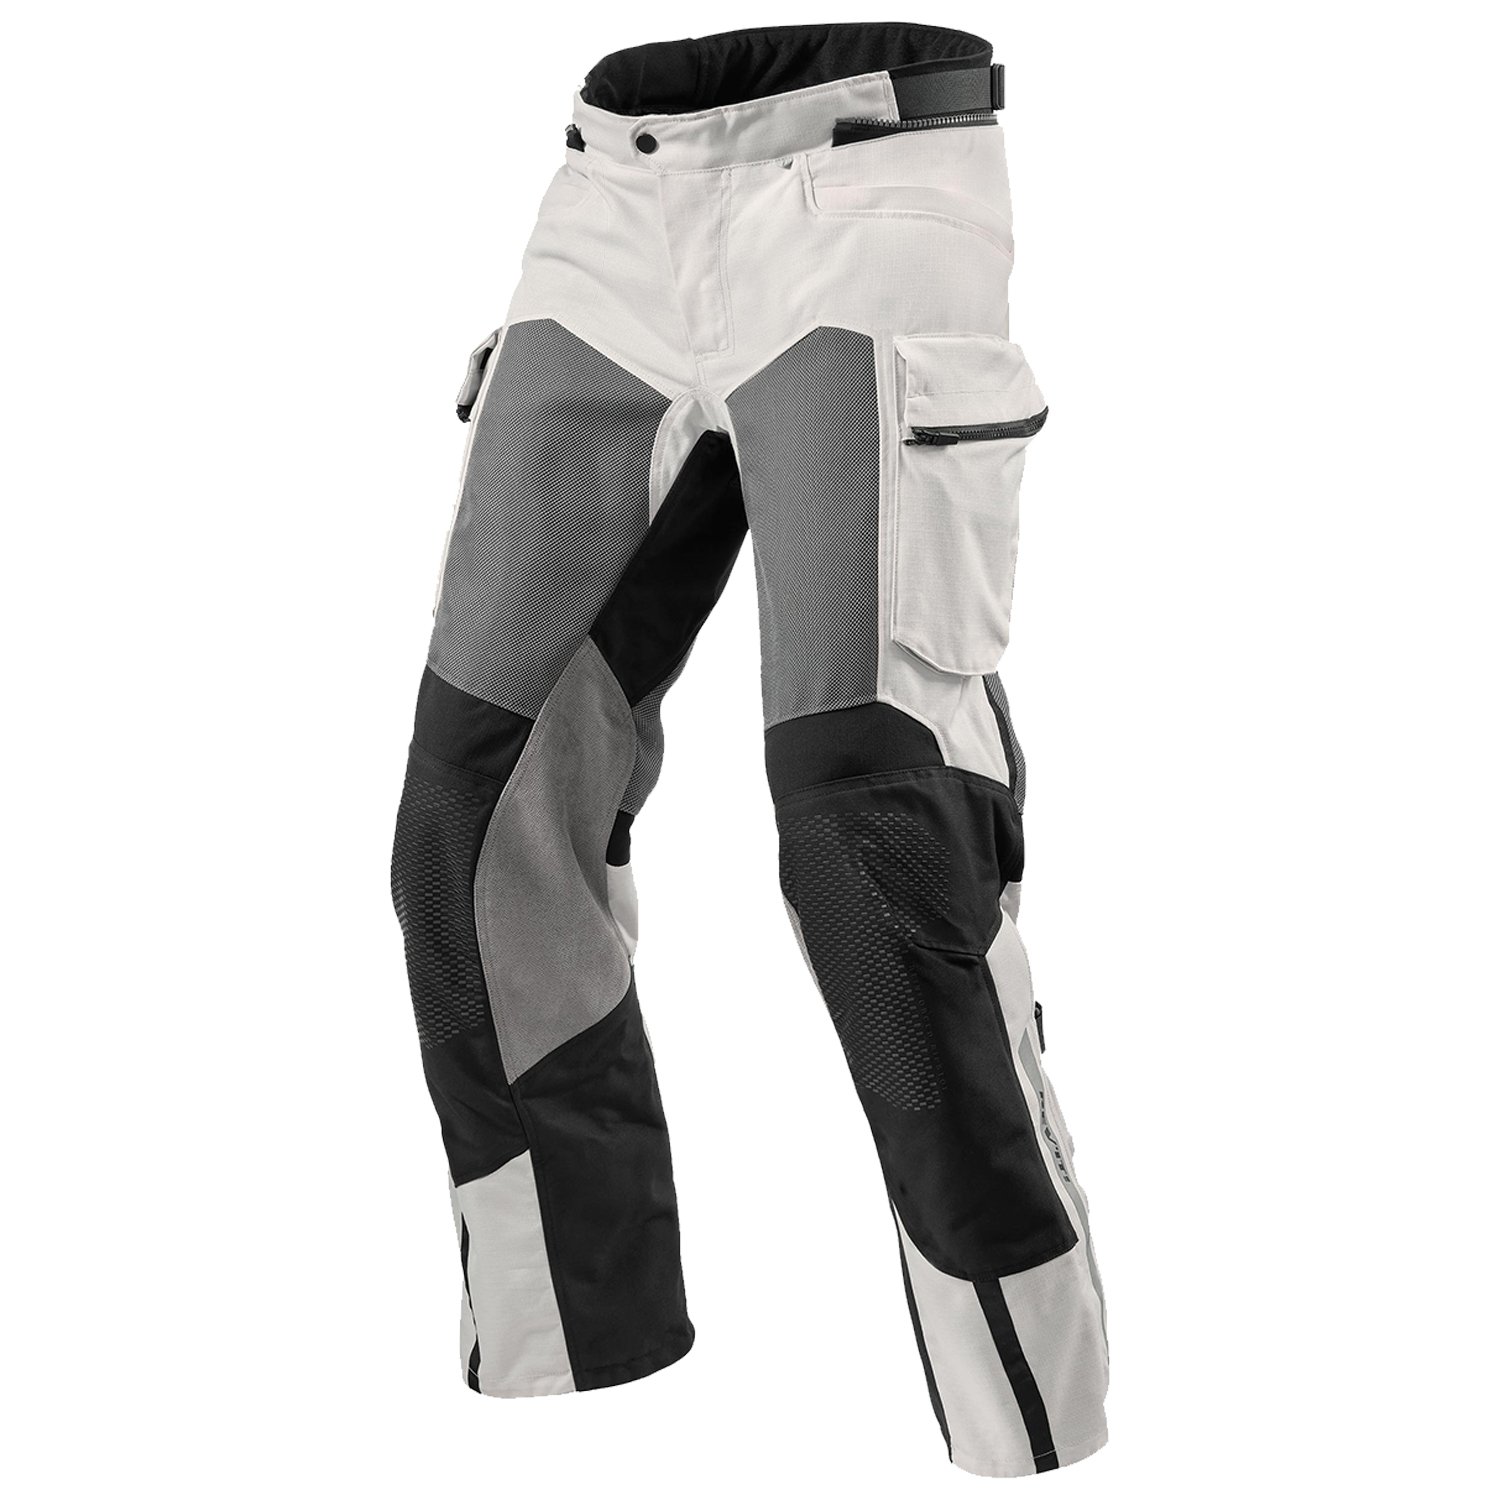 Image of REV'IT! Cayenne 2 Silver Motorcycle Pants Size XL ID 8700001335478